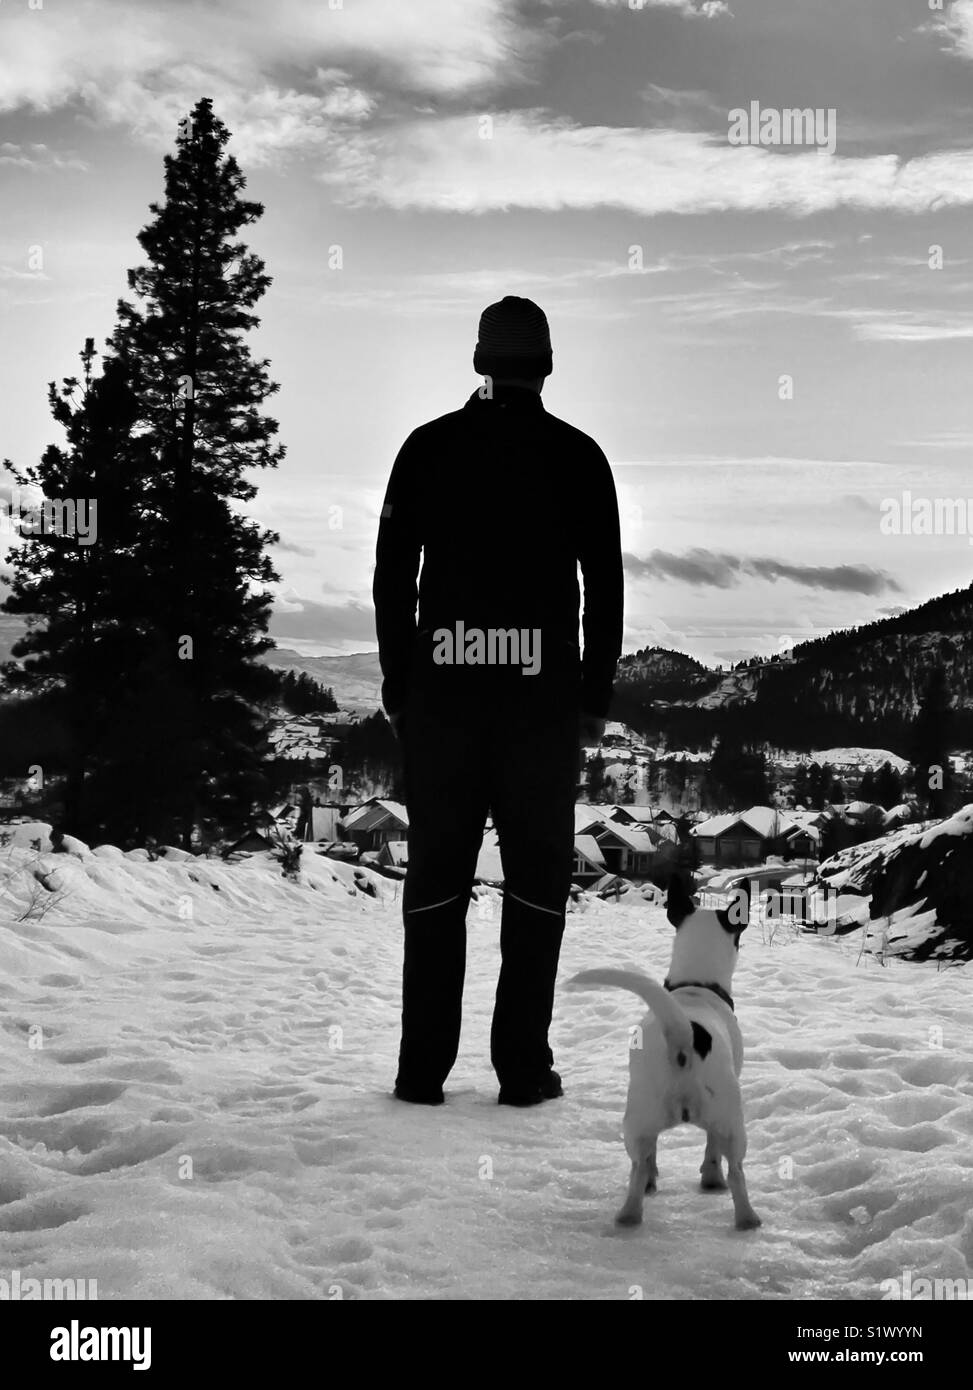 Silhouette of a man standing in the snow with dog. In black and white. Stock Photo